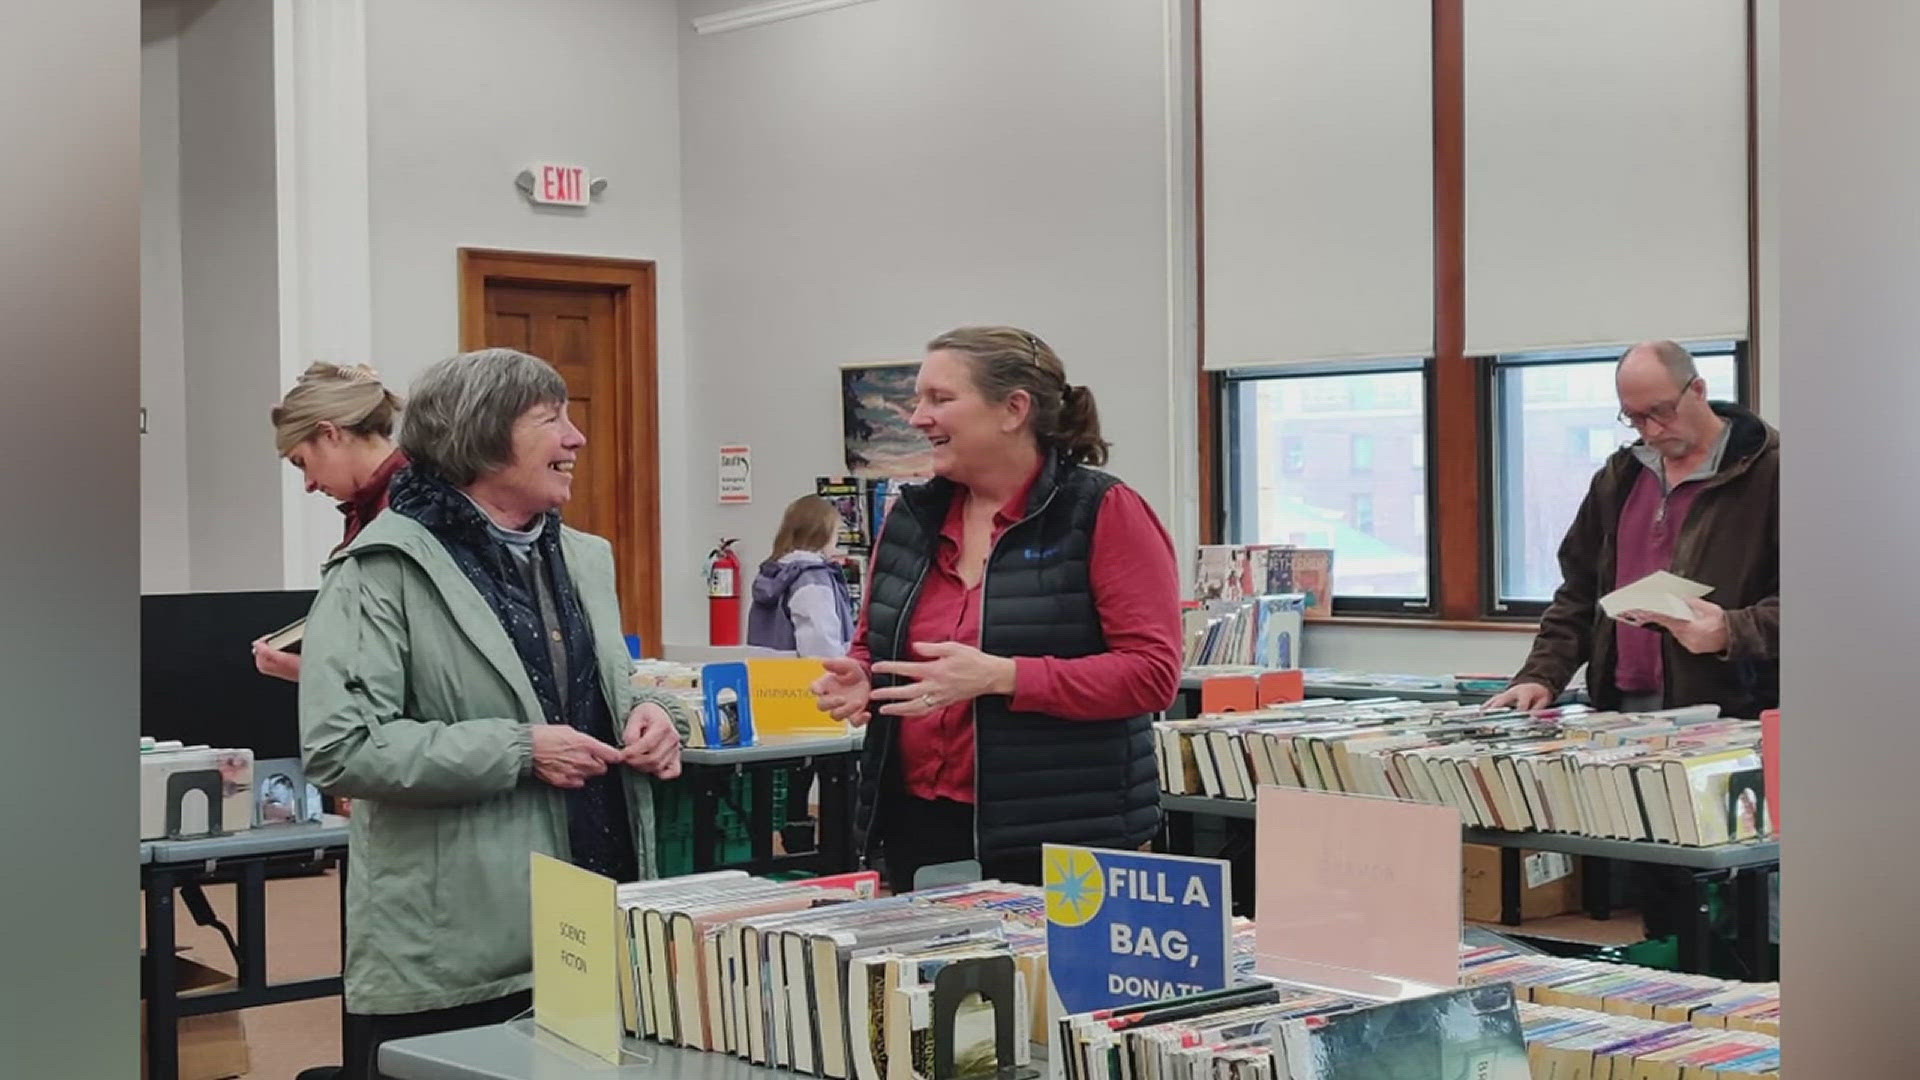 The two-day sale runs from 10 a.m. to 1 p.m. on April 26 and 27. It's hosted by PALS, the Library Foundation's volunteer group.